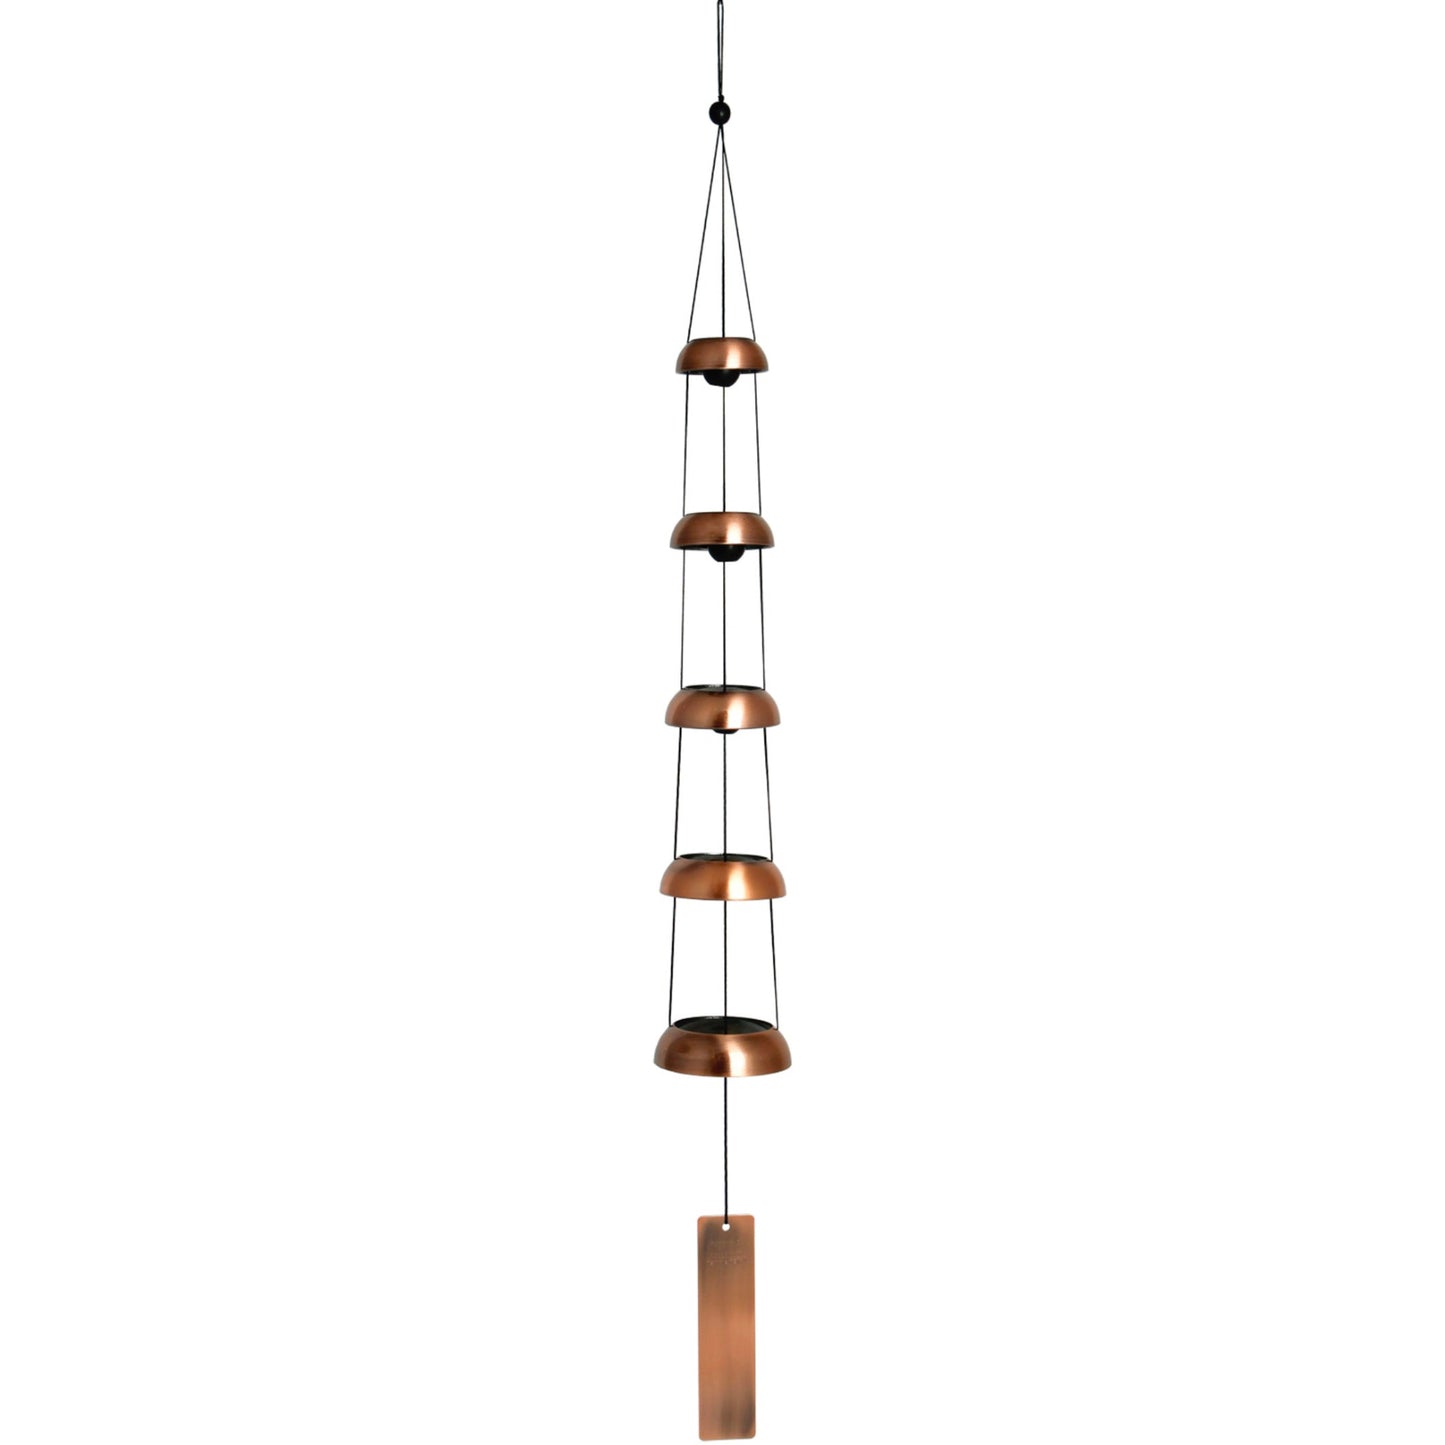 'Temple bell' Quintet wind chime from Woodstock Chimes (five bells)